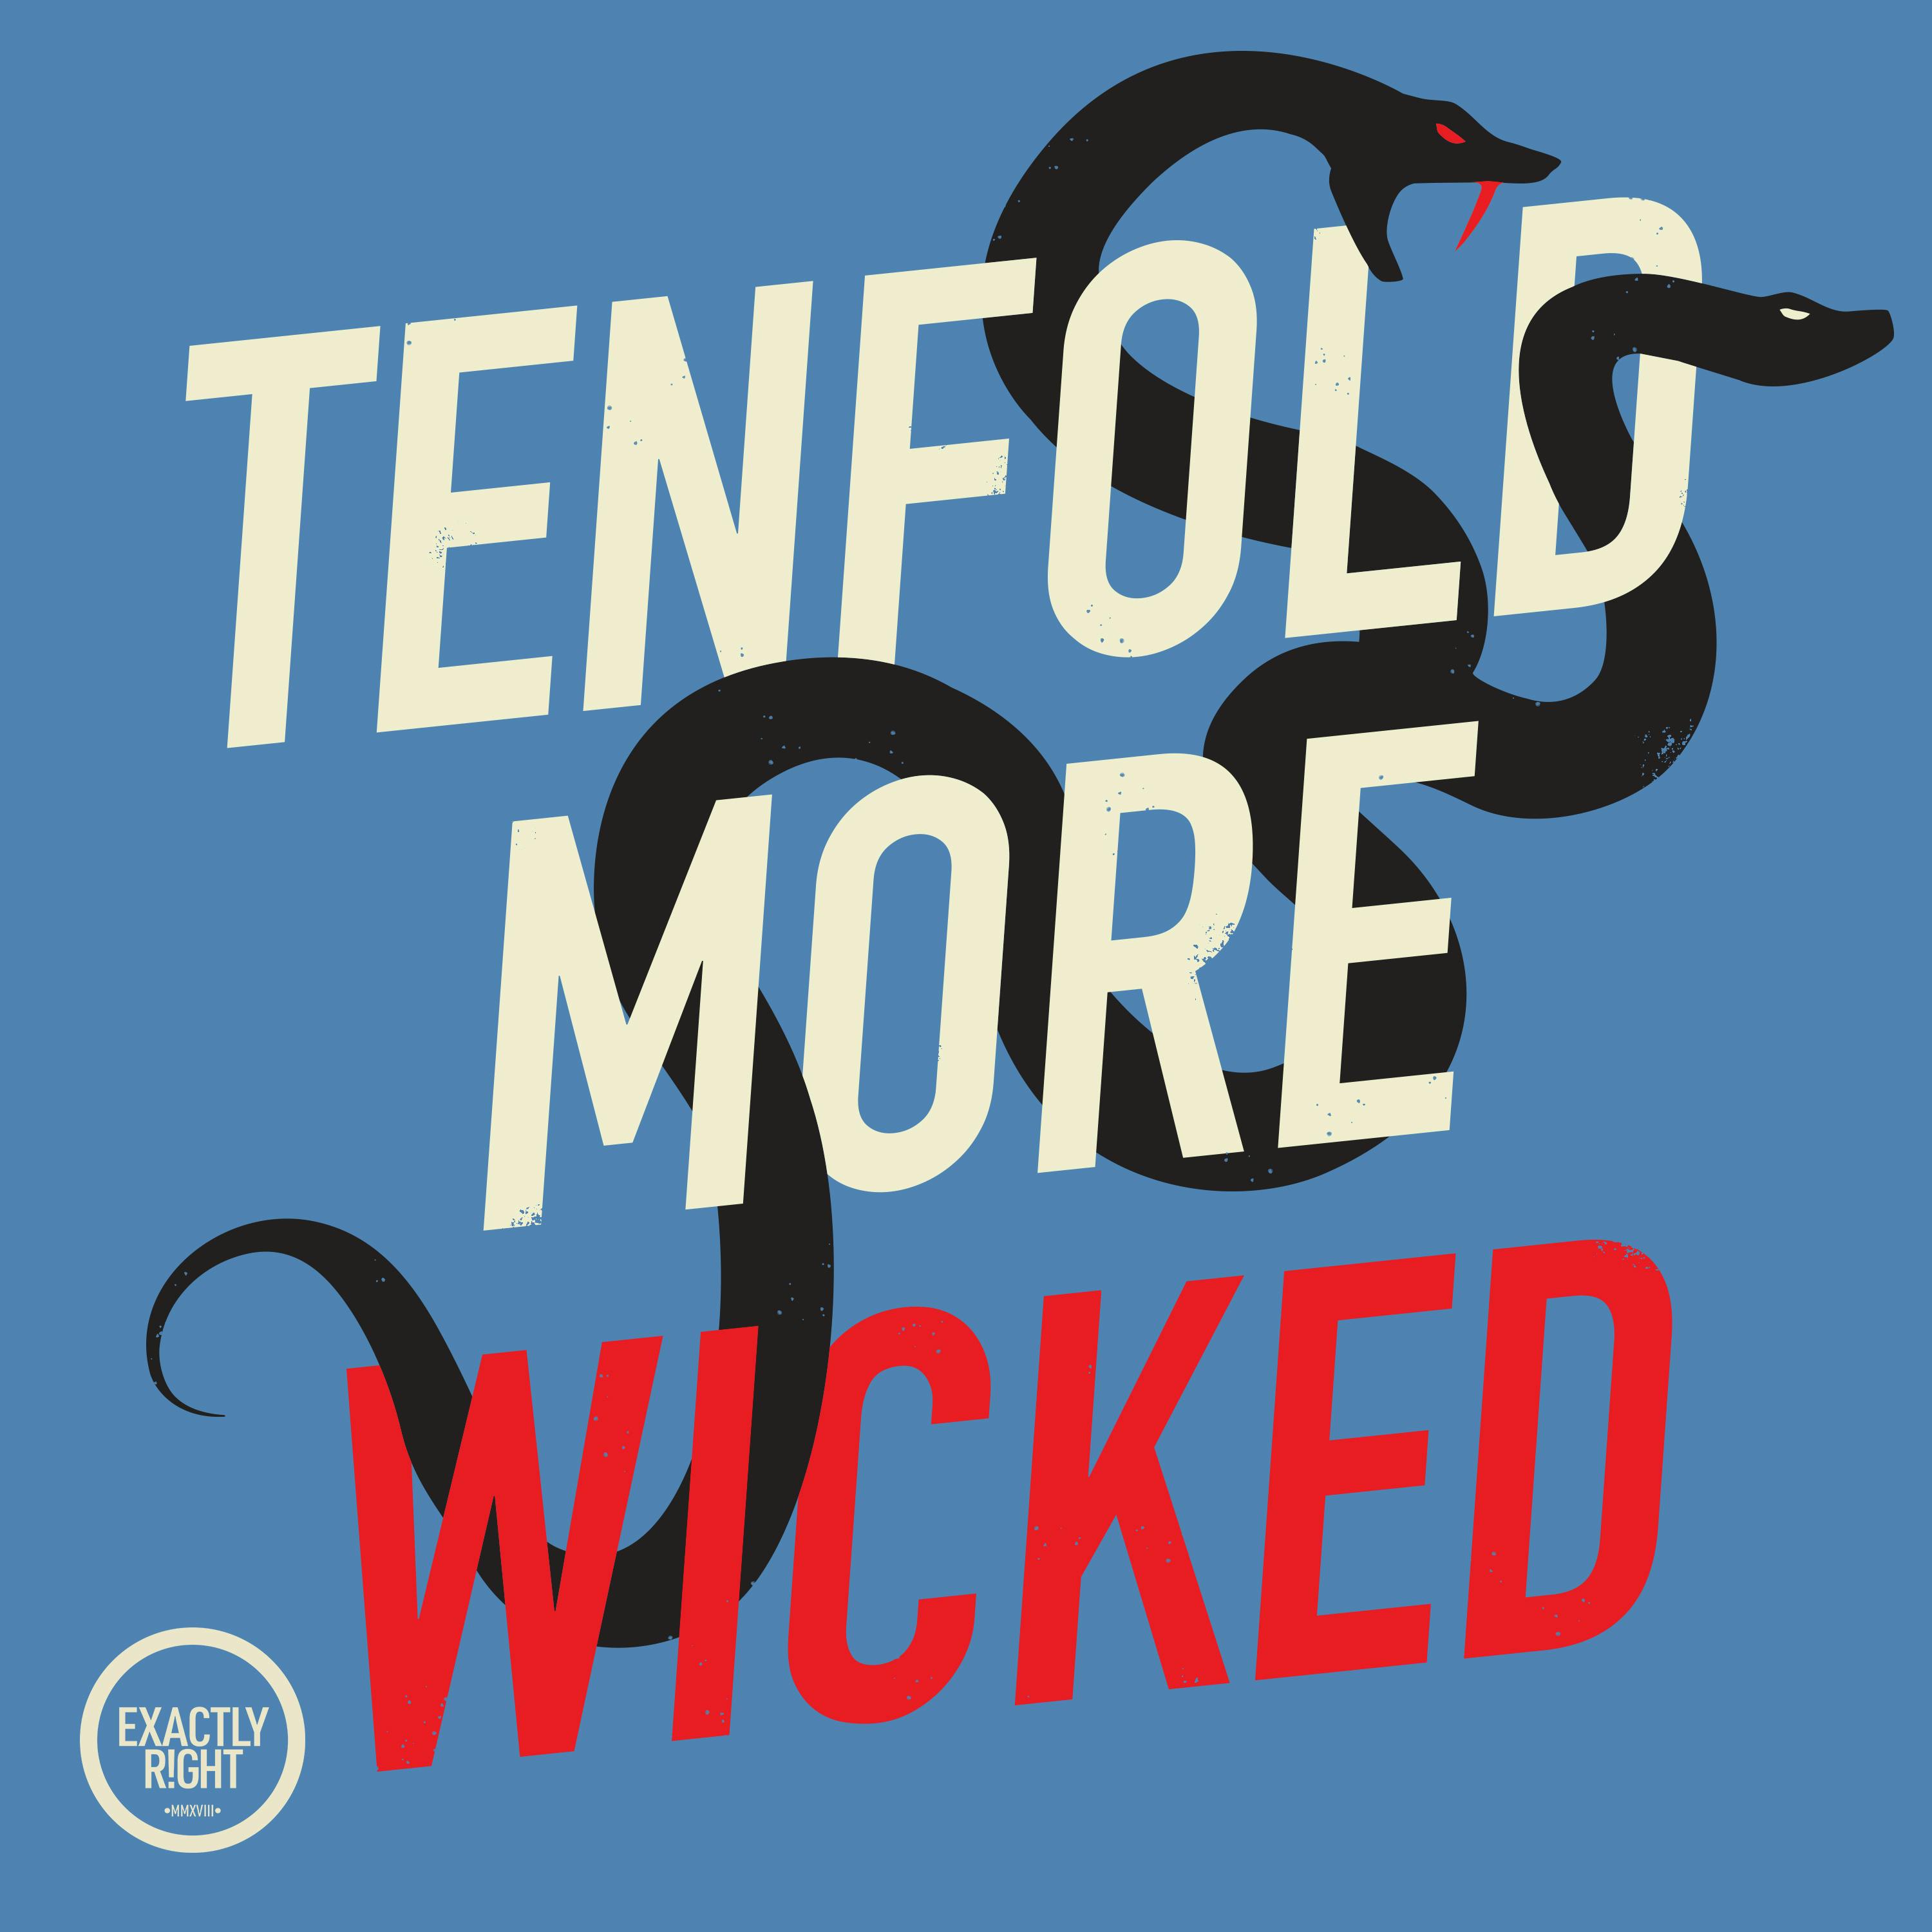 Tenfold More Wicked - Entitled: The Mosby Tavern